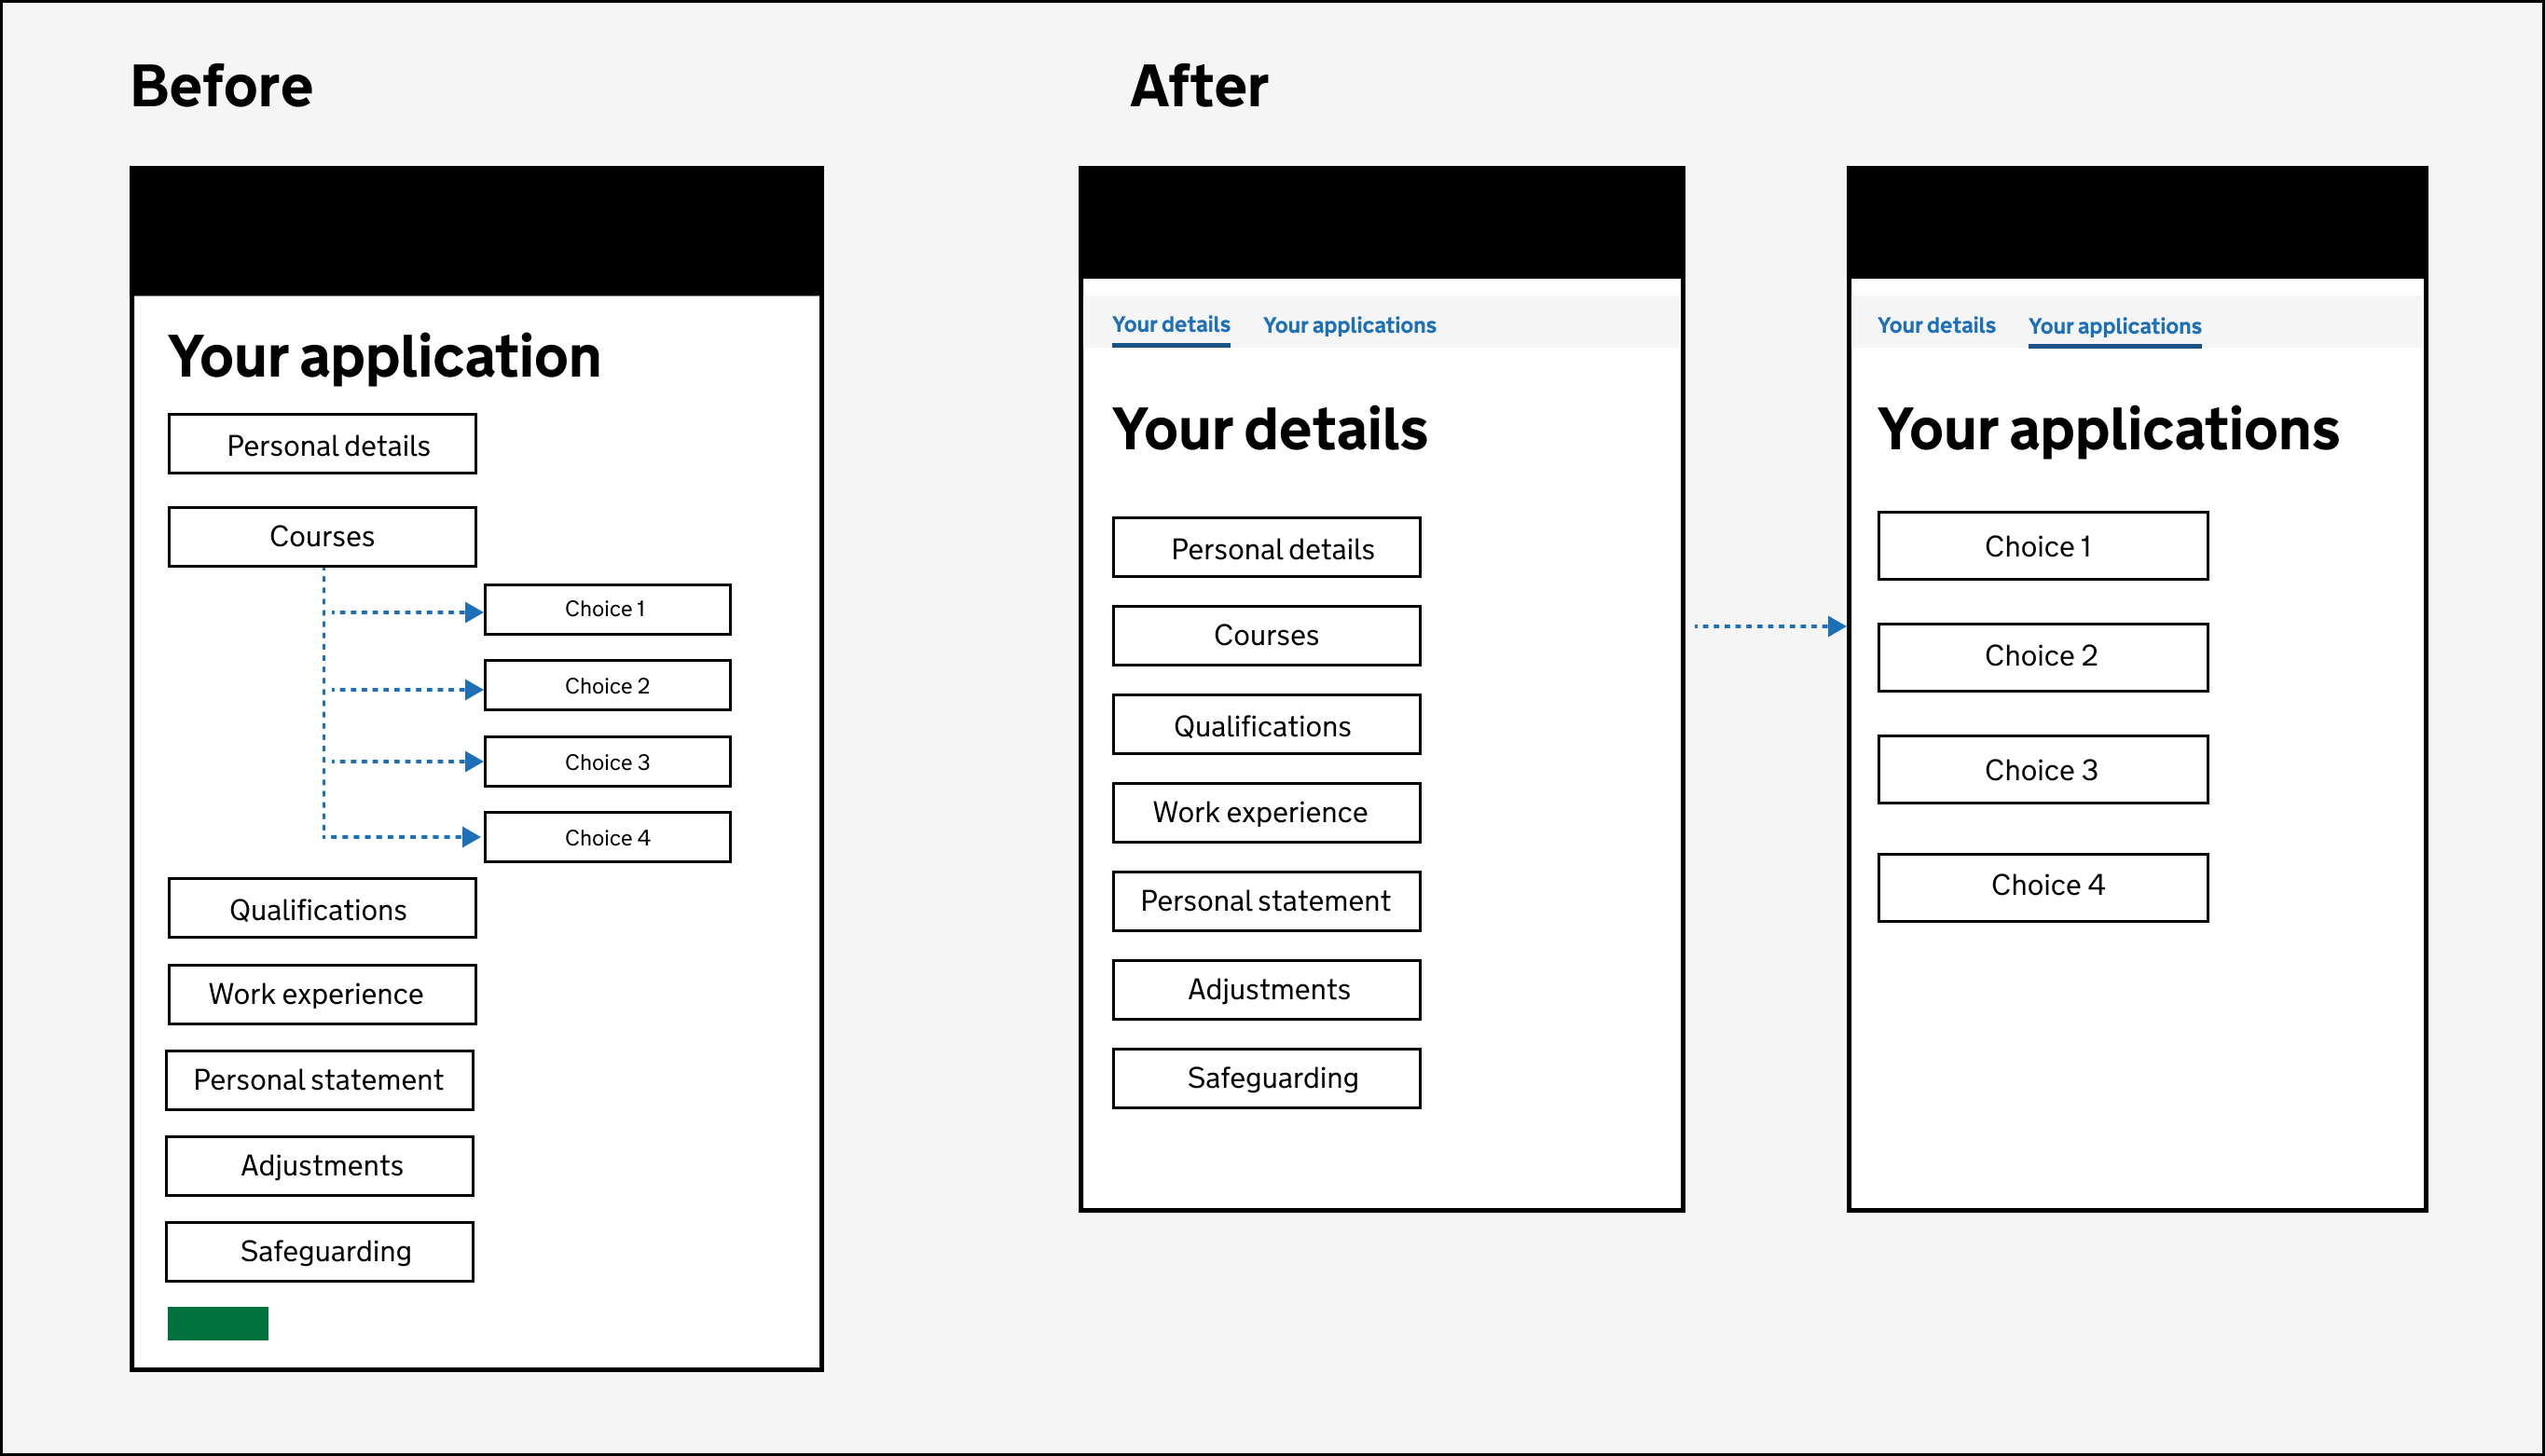 Illustration showing a before and after of the application process. Before shows how the application os one page where candidates can choose 4 course choices as part of their application for. After shows how candidates will fill out a section called ‘Your details’ first and then navigate to a section called ‘Your applications’ where they will choose their 4 courses and each of those would become an application."